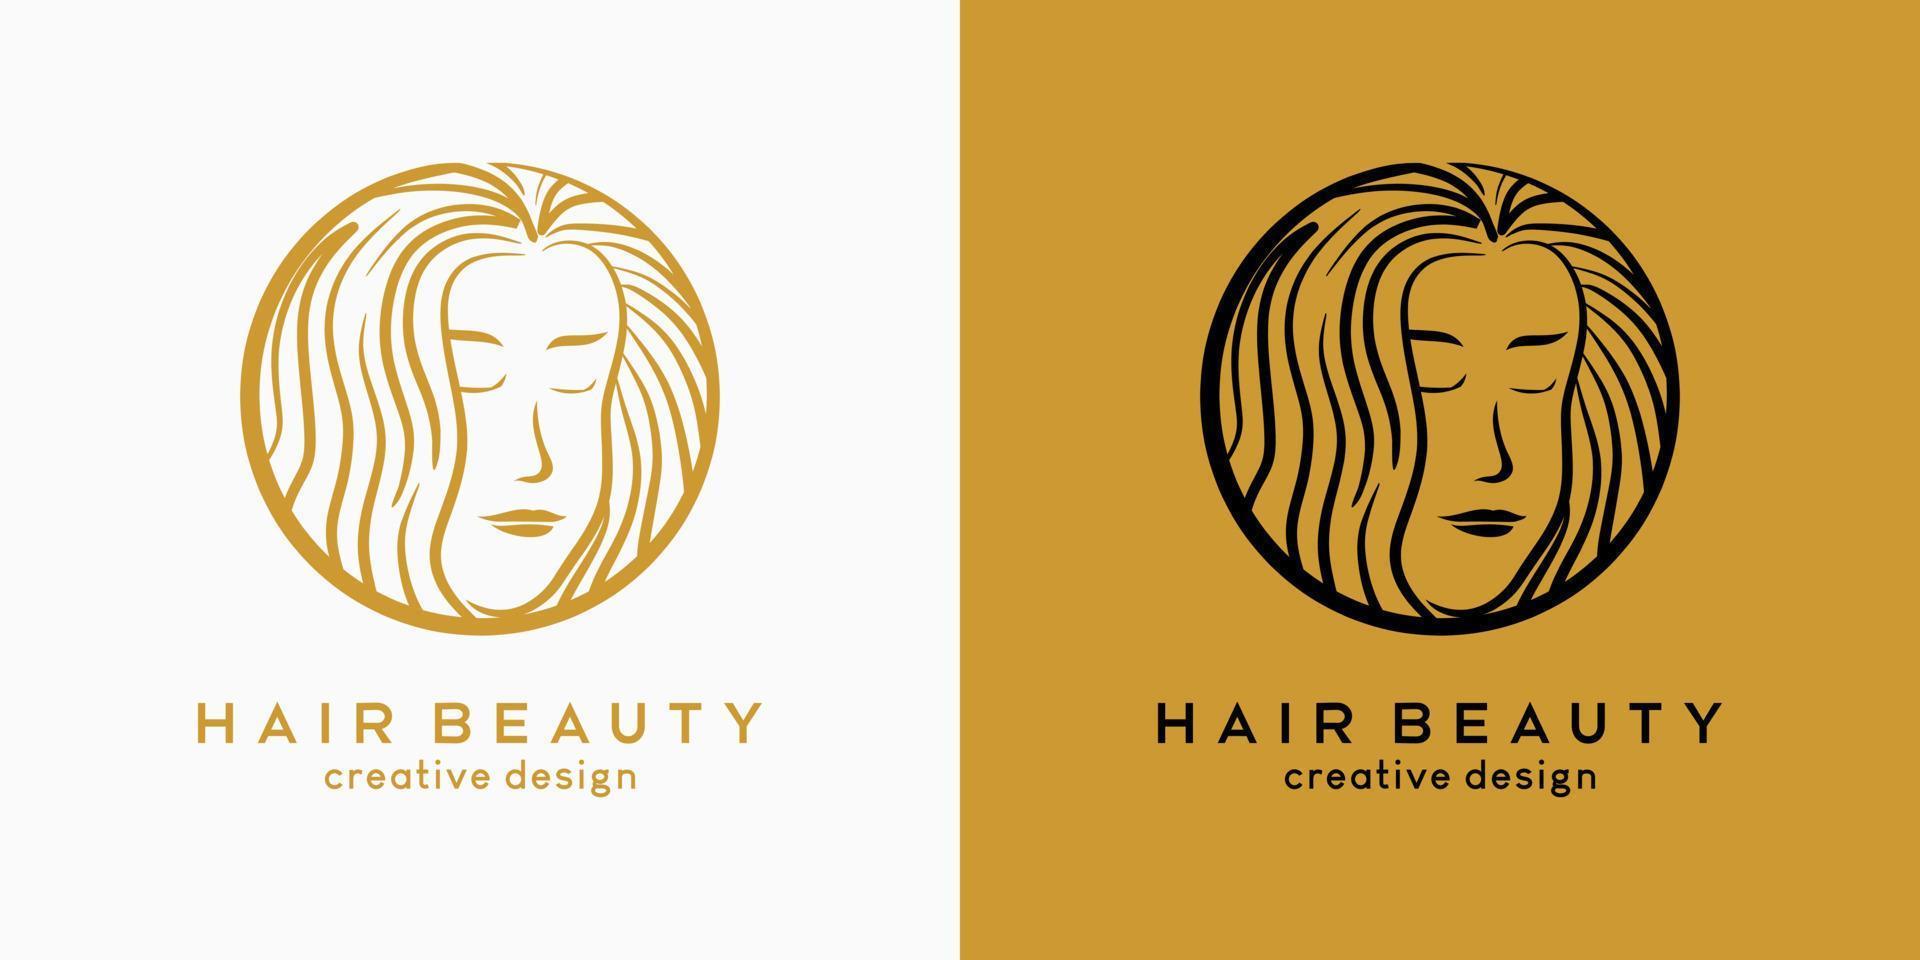 Hair salon logo design, hair beauty or hair care, long haired woman face with hand drawn concept in circle vector